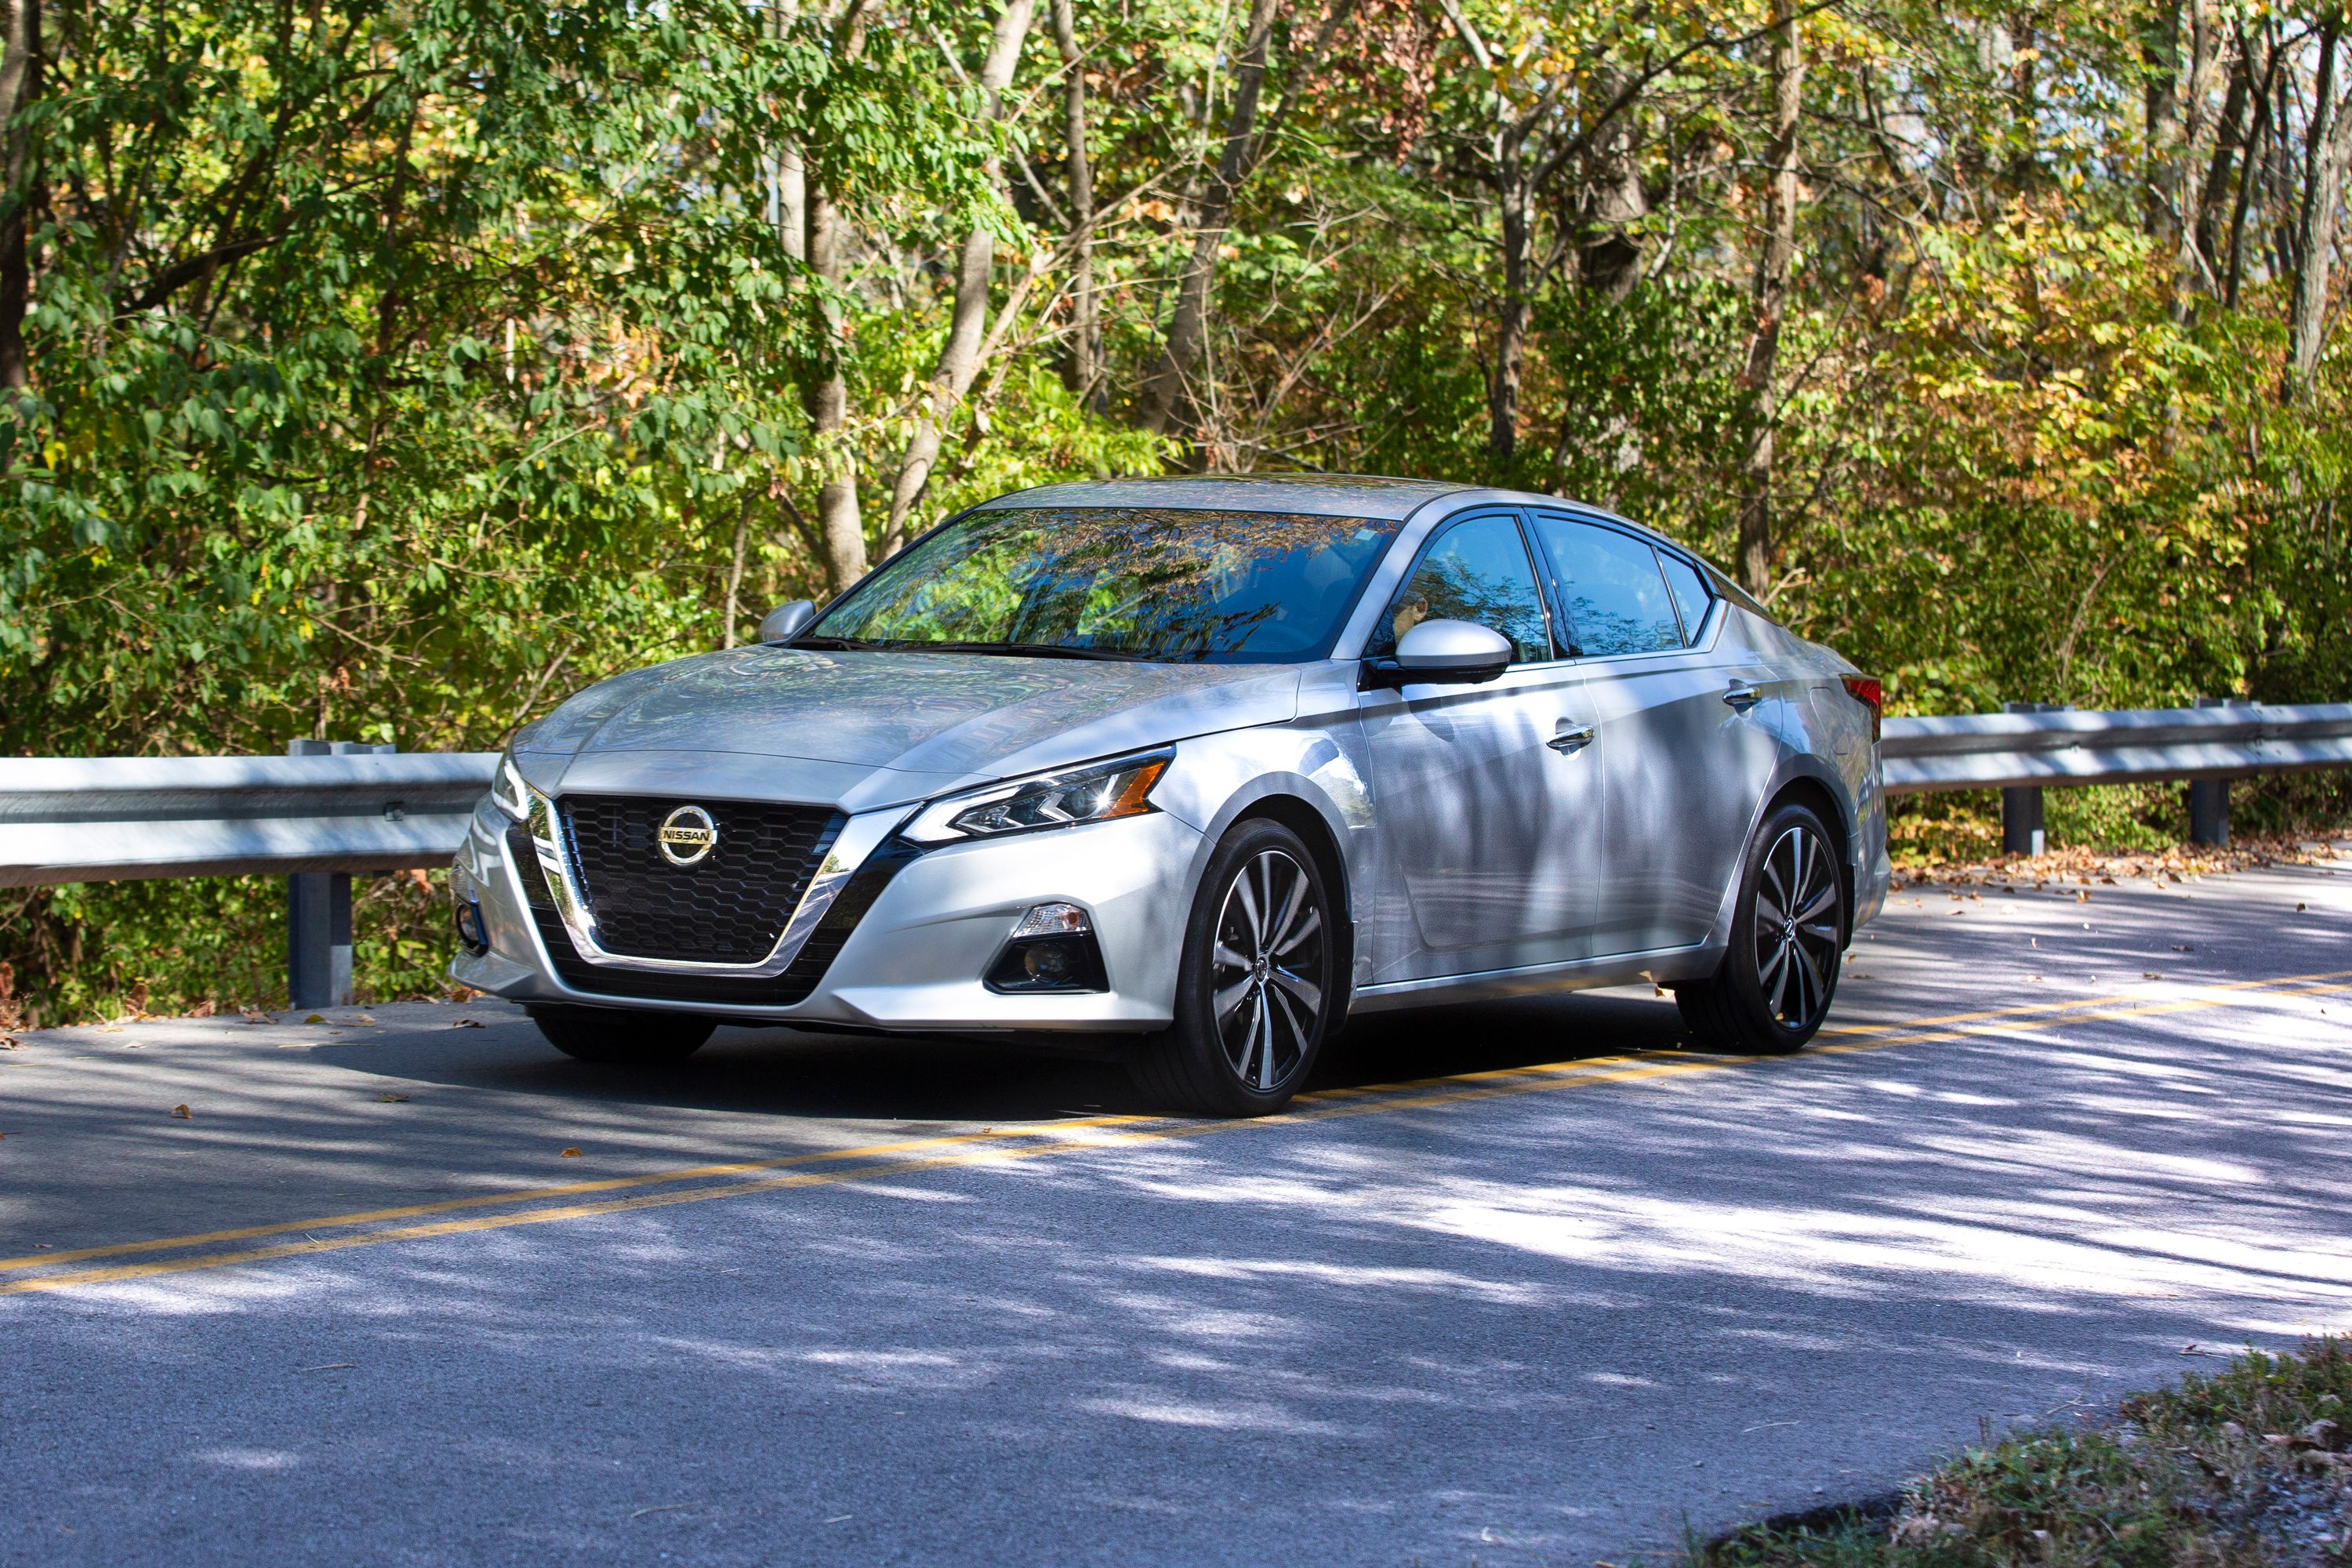 2019 Nissan Maxima review: The 'four-door sports car' that isn't - CNET